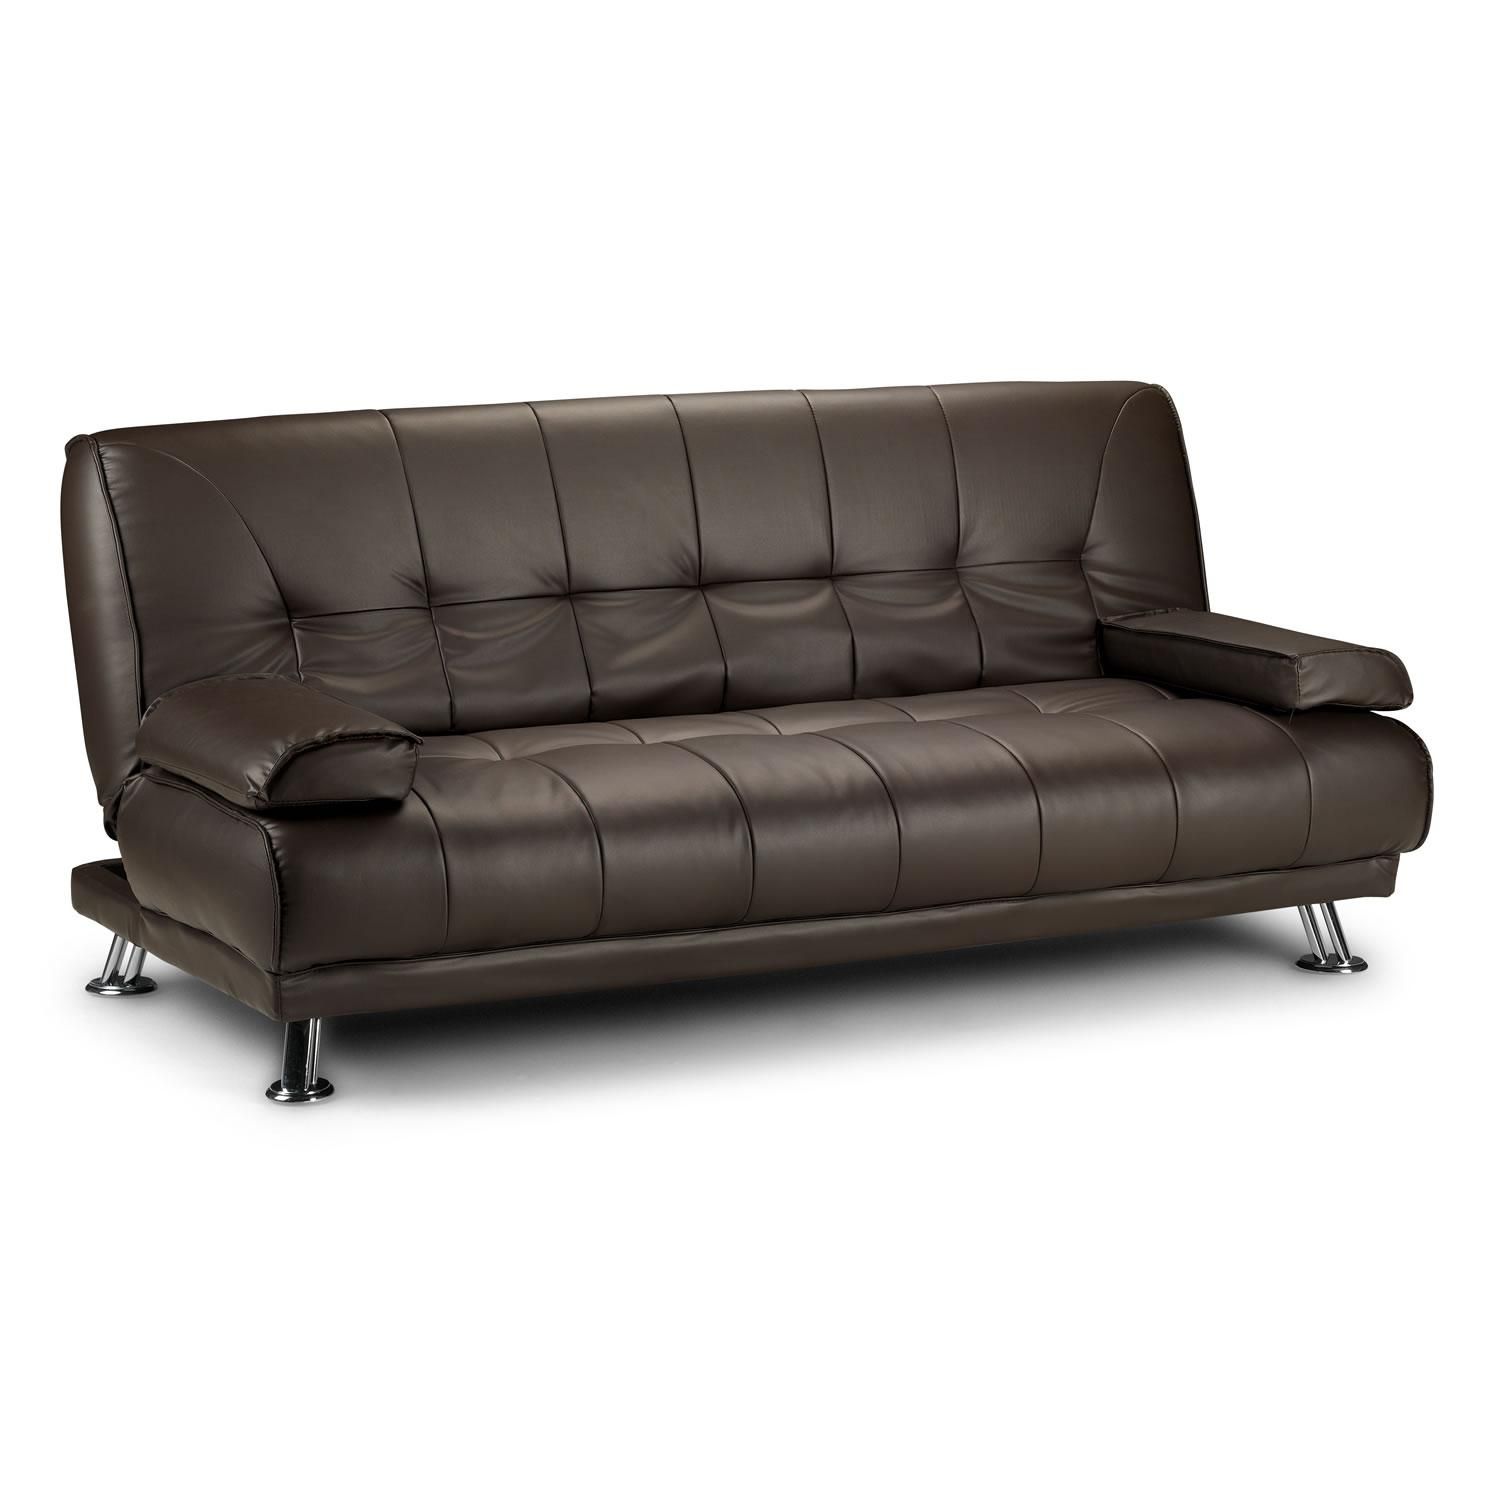 Click Clack Sofa Bed With Storage Enchanting Click Clack Sofa For Leather Sofa Beds With Storage (View 14 of 20)